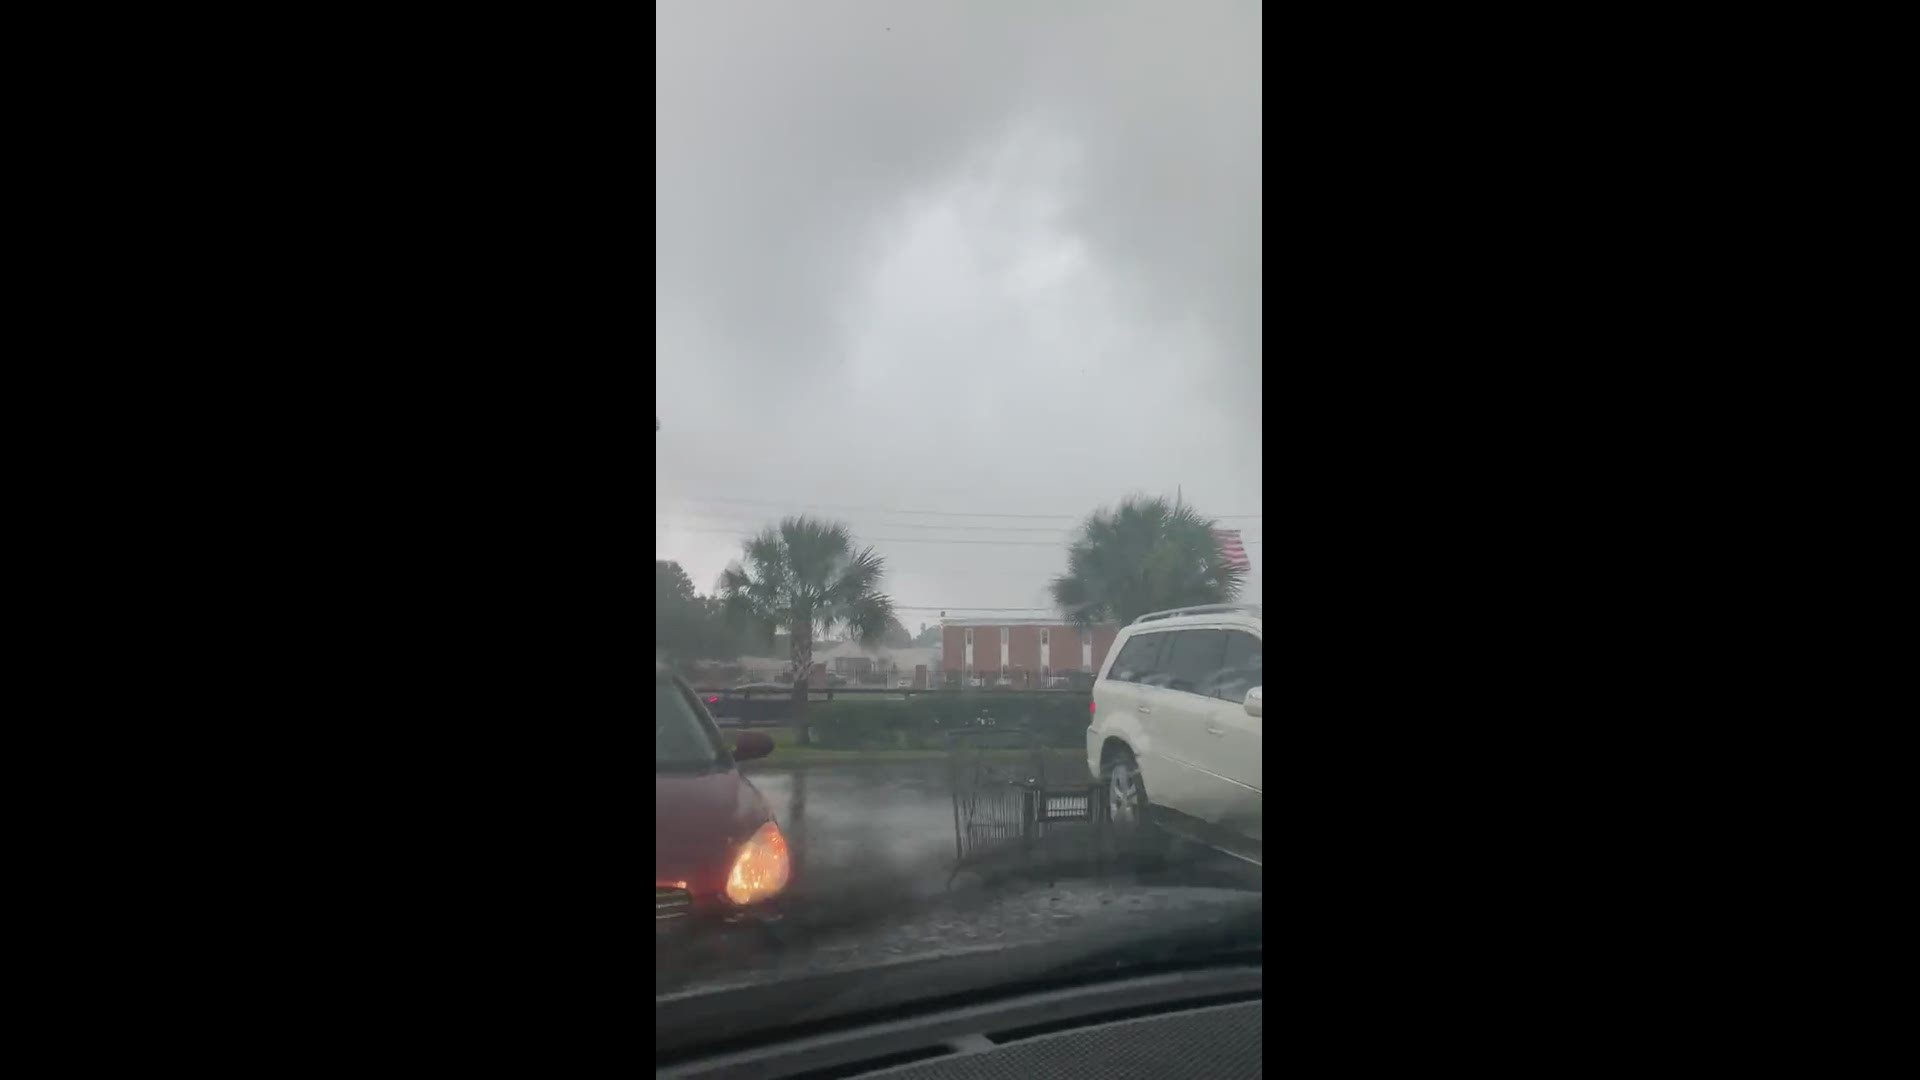 The video sent by a First Coast News viewer was taken at Fresh Field Farms.
Credit: Anastasia